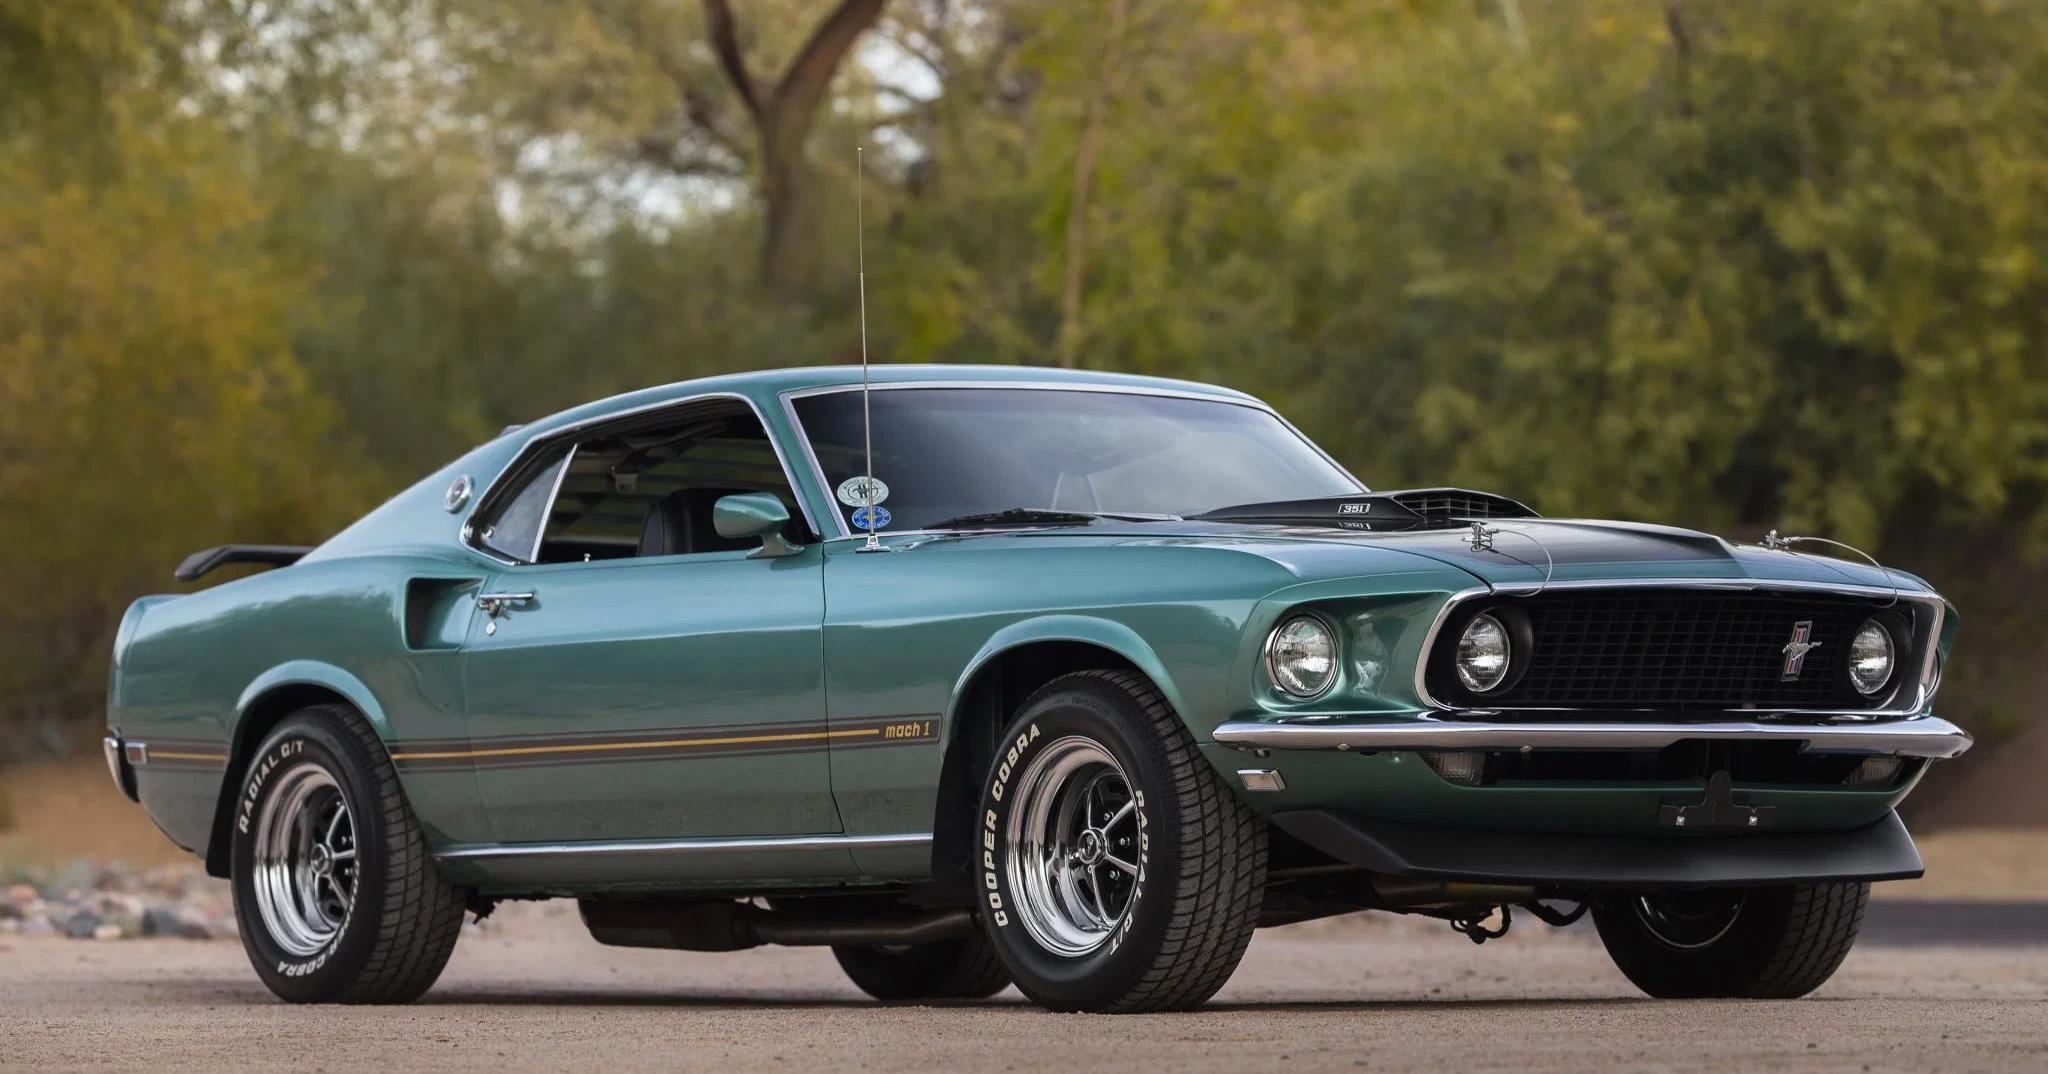 Ford Mustang Mach 1 351 Mk I 290 HP specs, 0-60, quarter mile ...